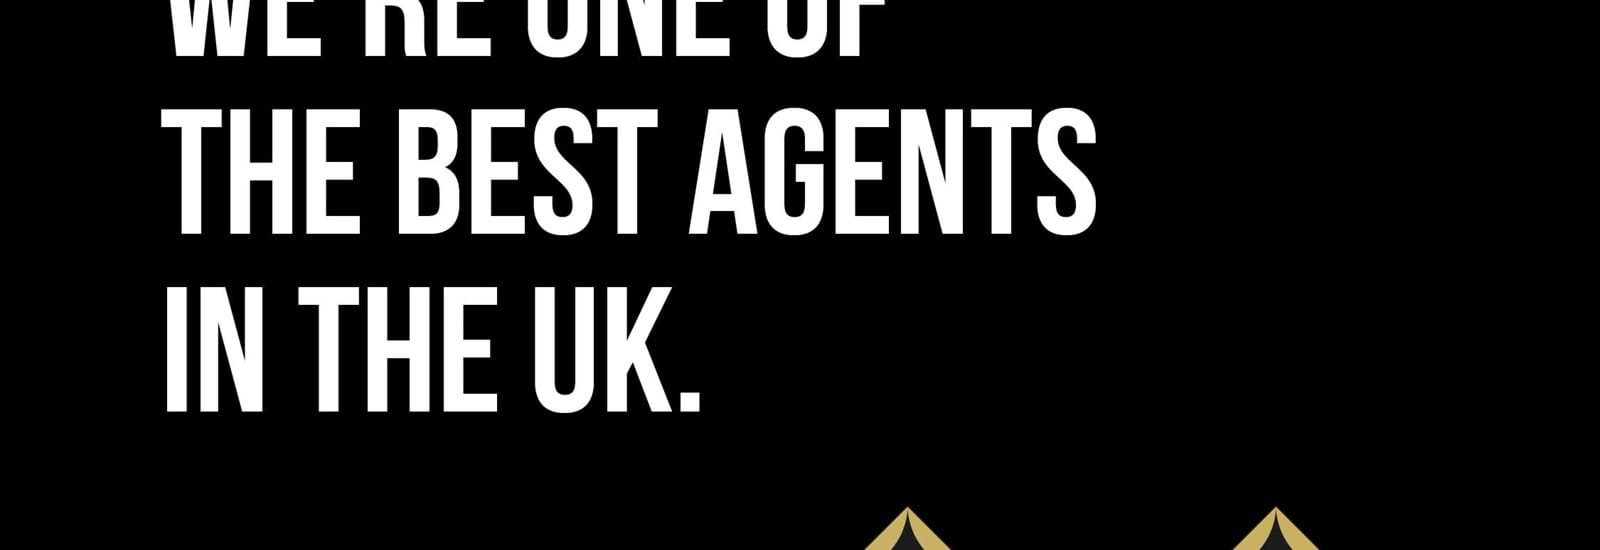 Banner for It's official, we are one of the best agents in the UK!